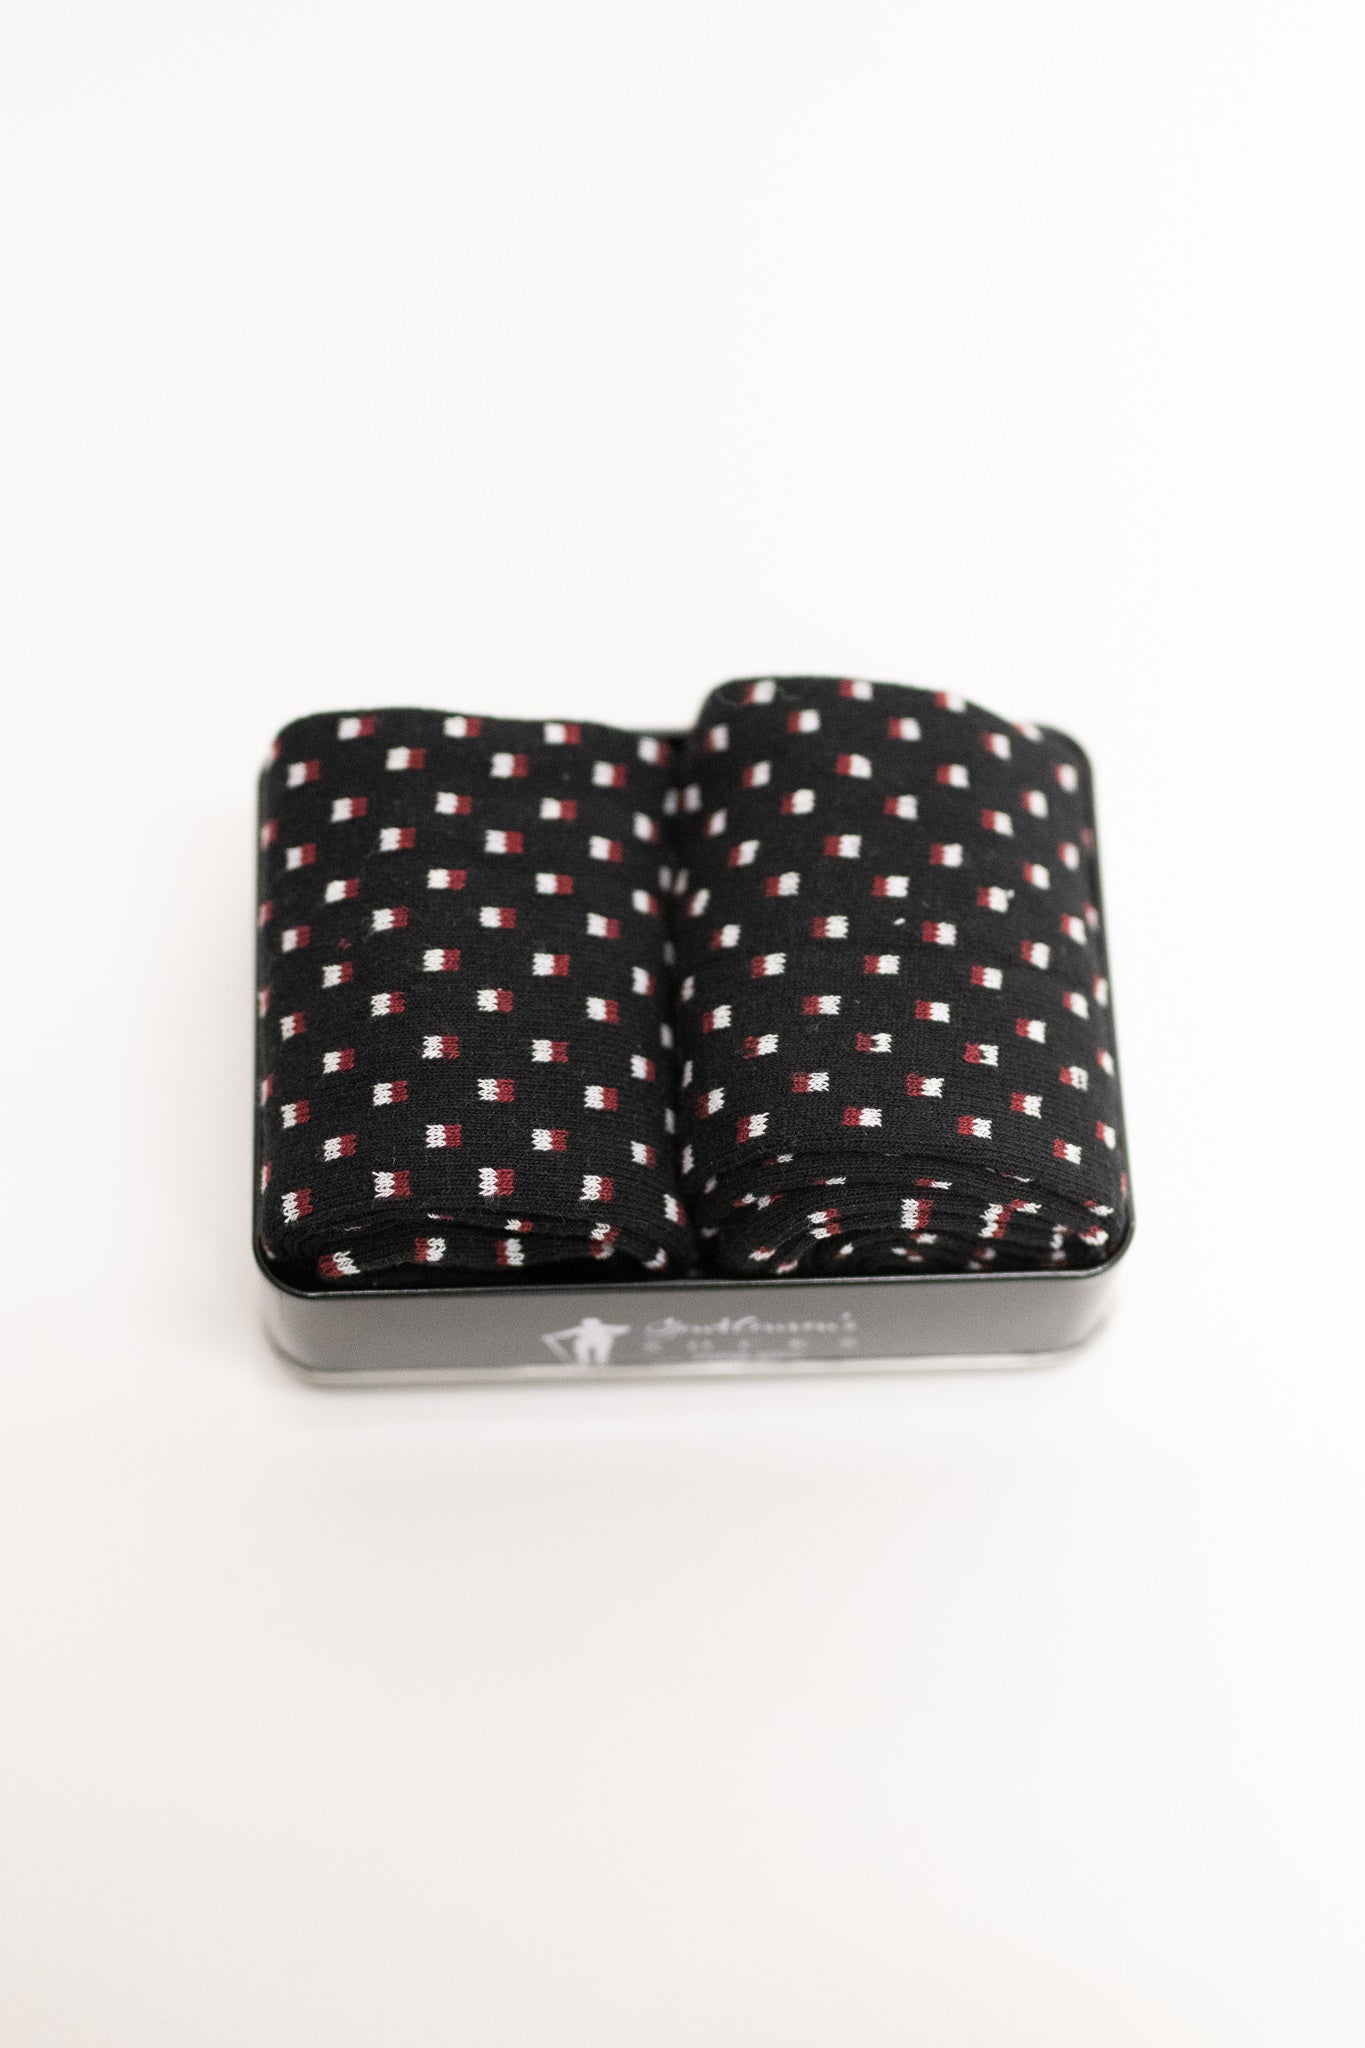 Gentlemen's Socks Gift Tin - Black with Red & White Squares One Size